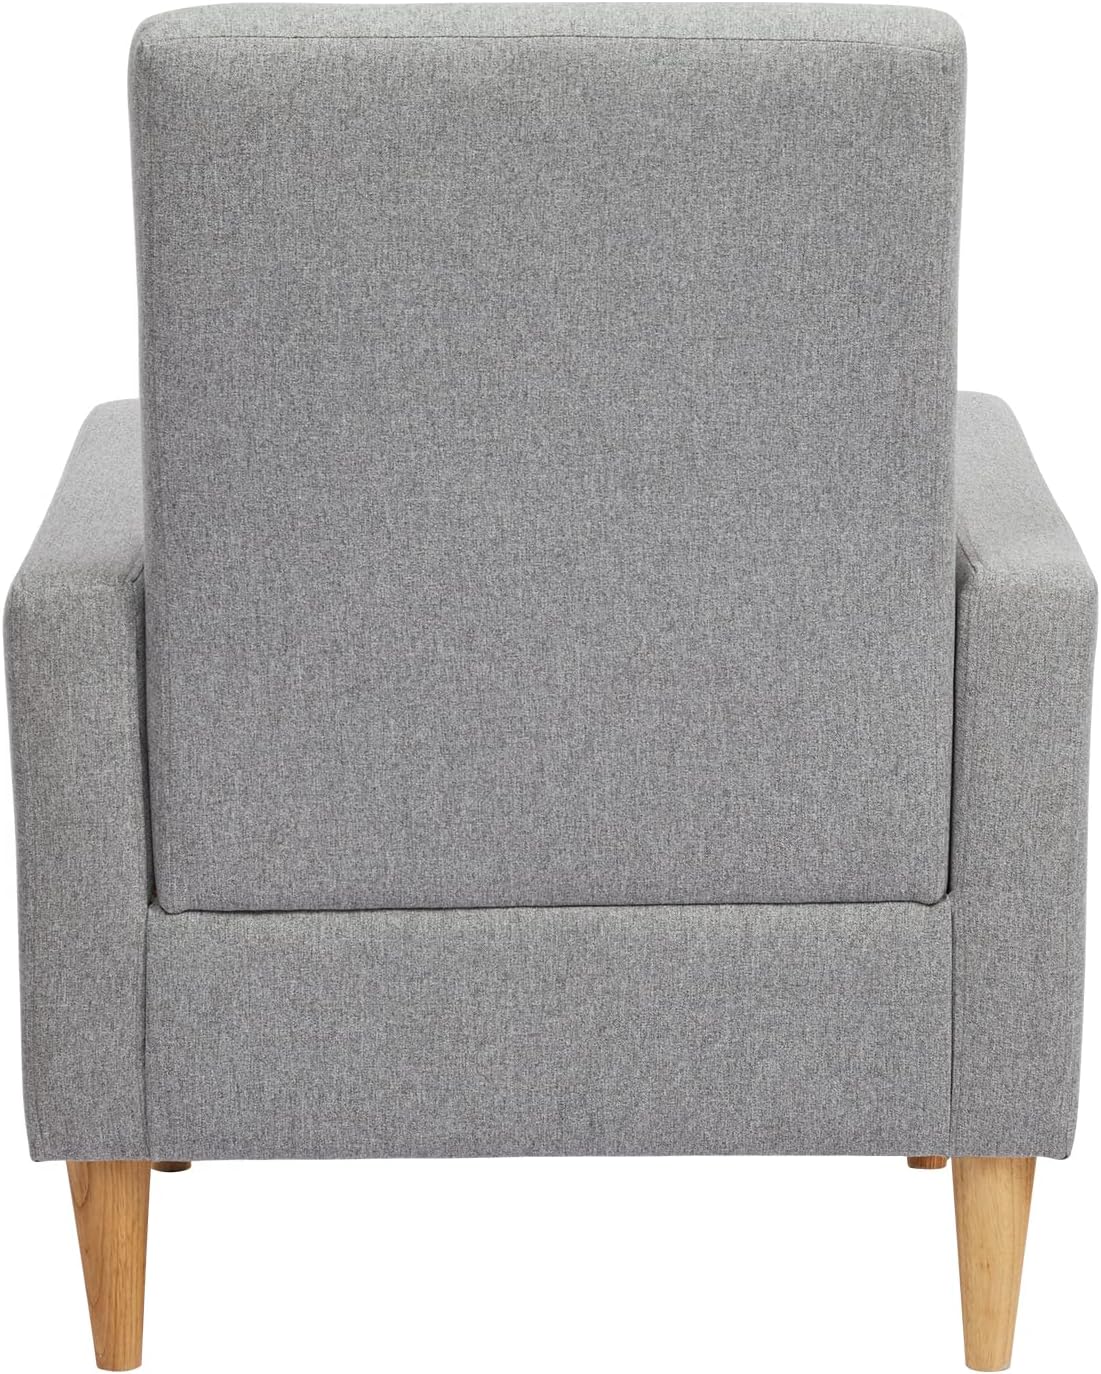 Modern Upholstered Accent Chair Armchair with Pillow, Fabric Reading Living Room Side Chair, Single Sofa with Lounge Seat and Wood Legs, Light Grey